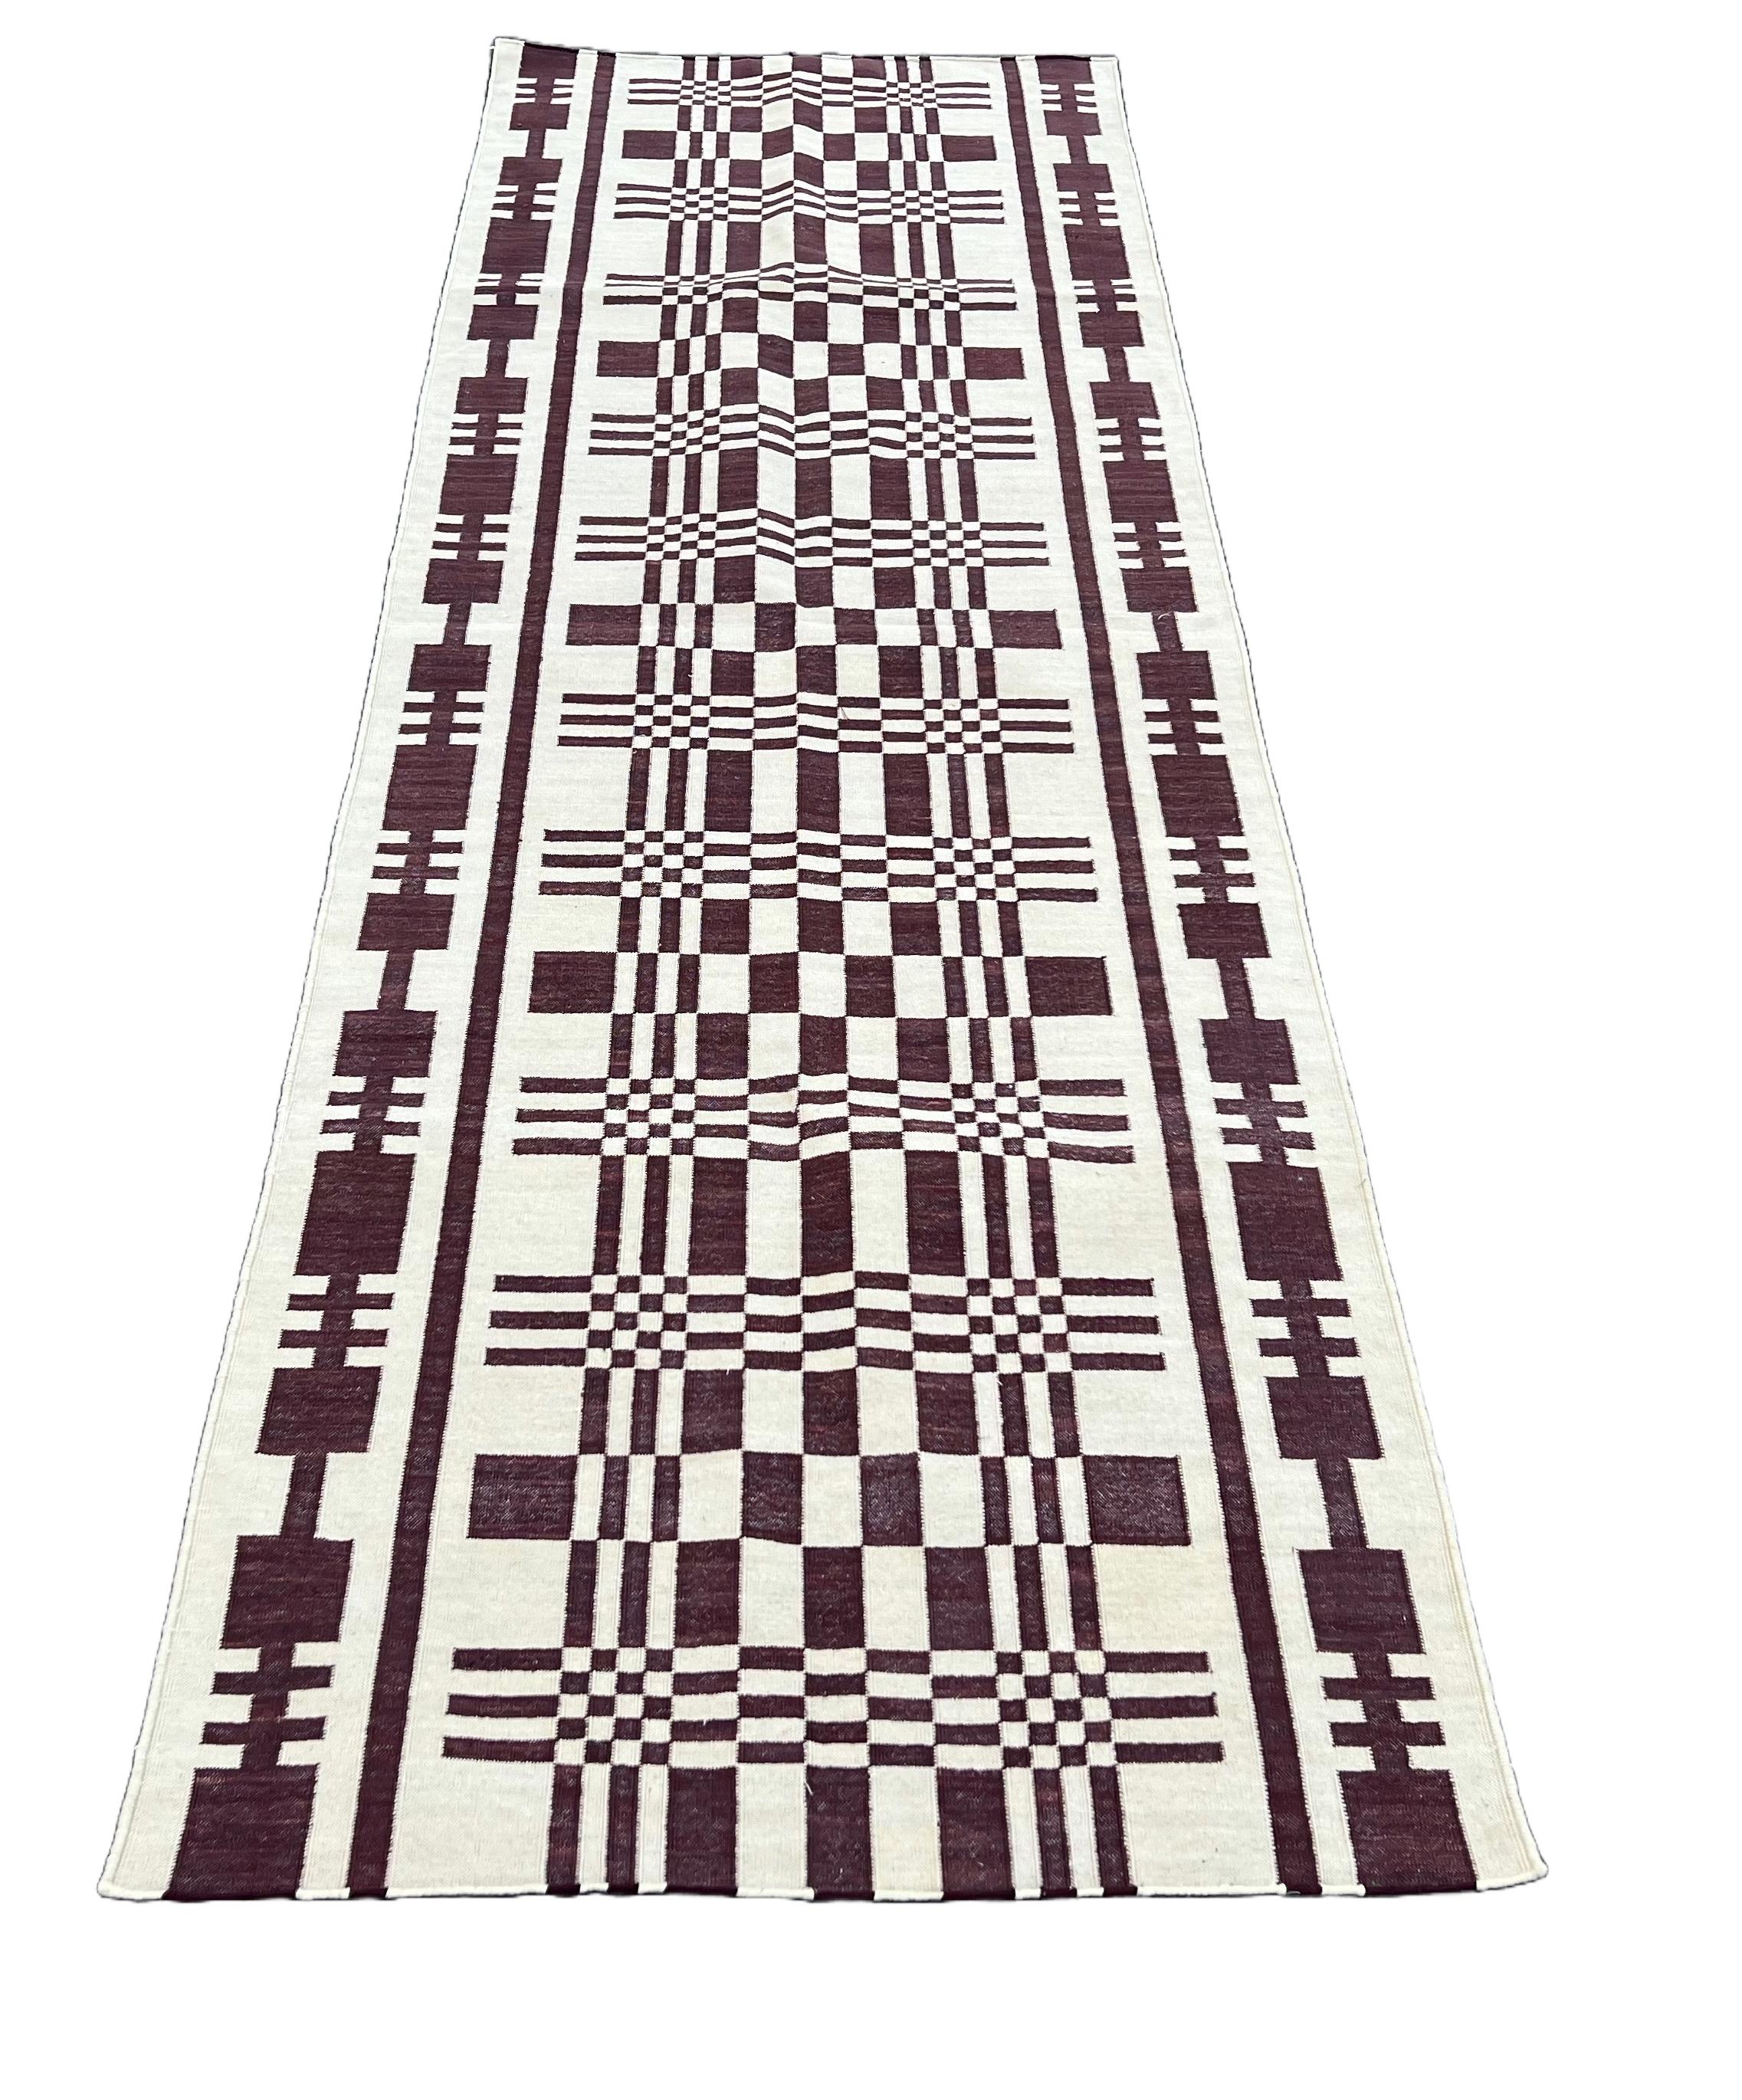 Cotton Natural Vegetable Dyed, Cream And Brown Geometric Indian Dhurrie Runner-3'x12'
These special flat-weave dhurries are hand-woven with 15 ply 100% cotton yarn. Due to the special manufacturing techniques used to create our rugs, the size and